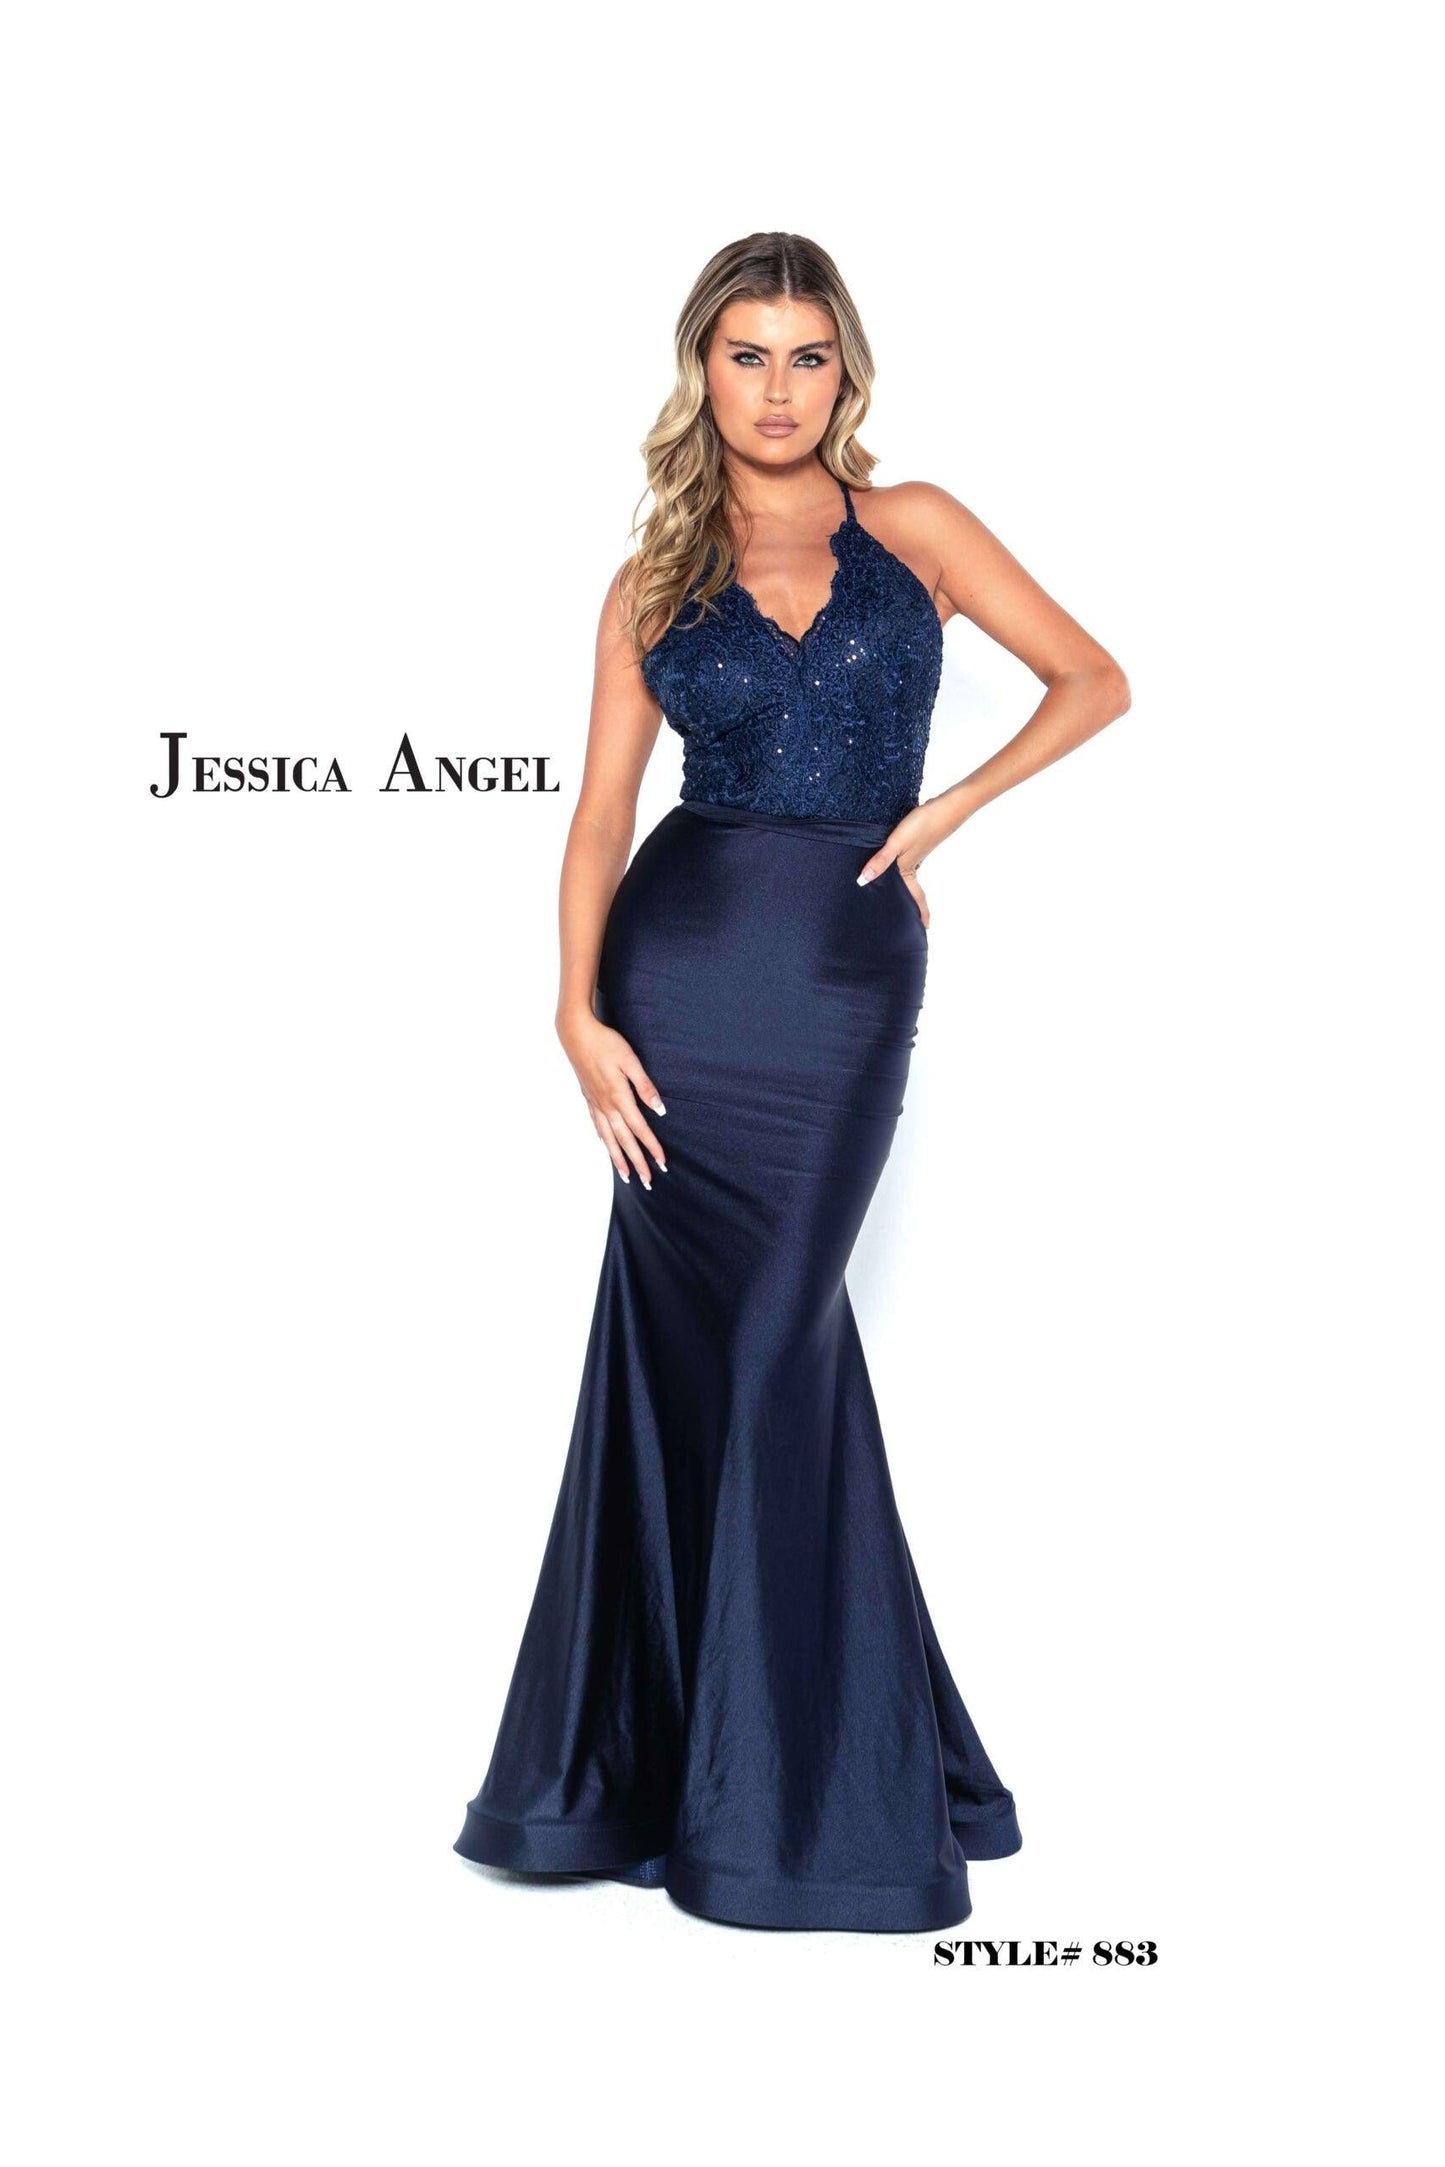 Jessica Angel Long Formal Fitted Lace Dress 883 - The Dress Outlet